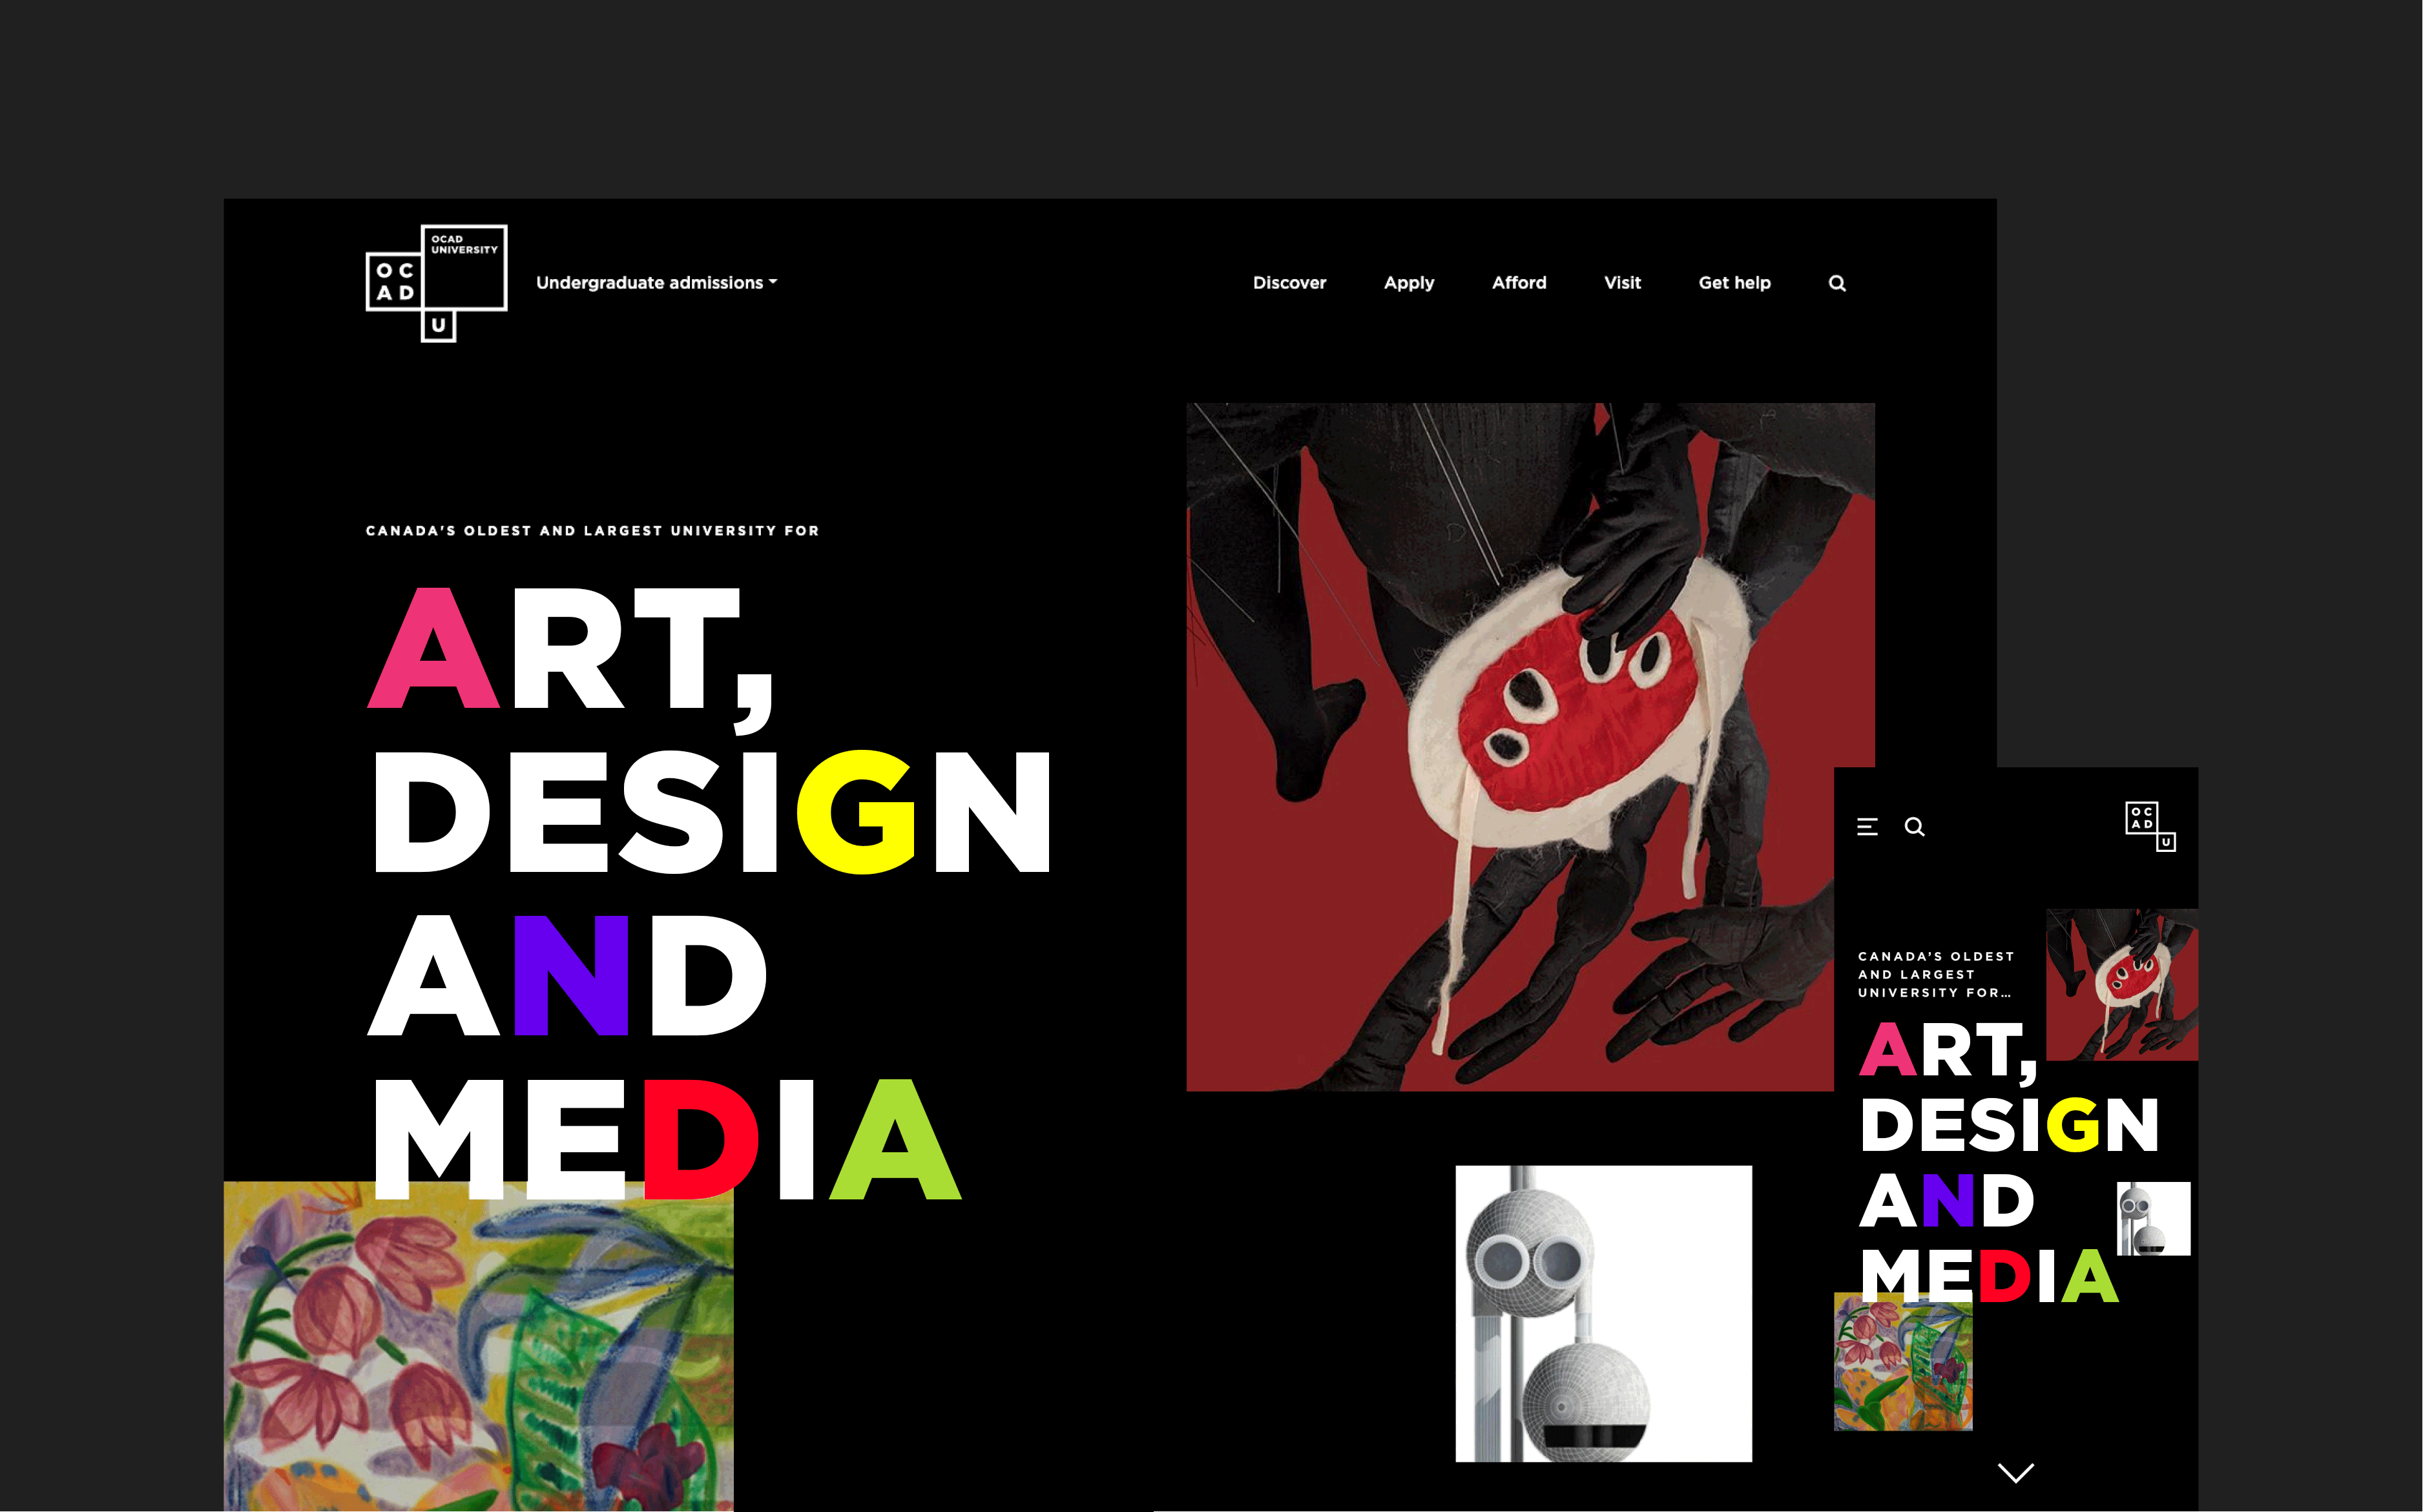 A visually bold homepage with a black background